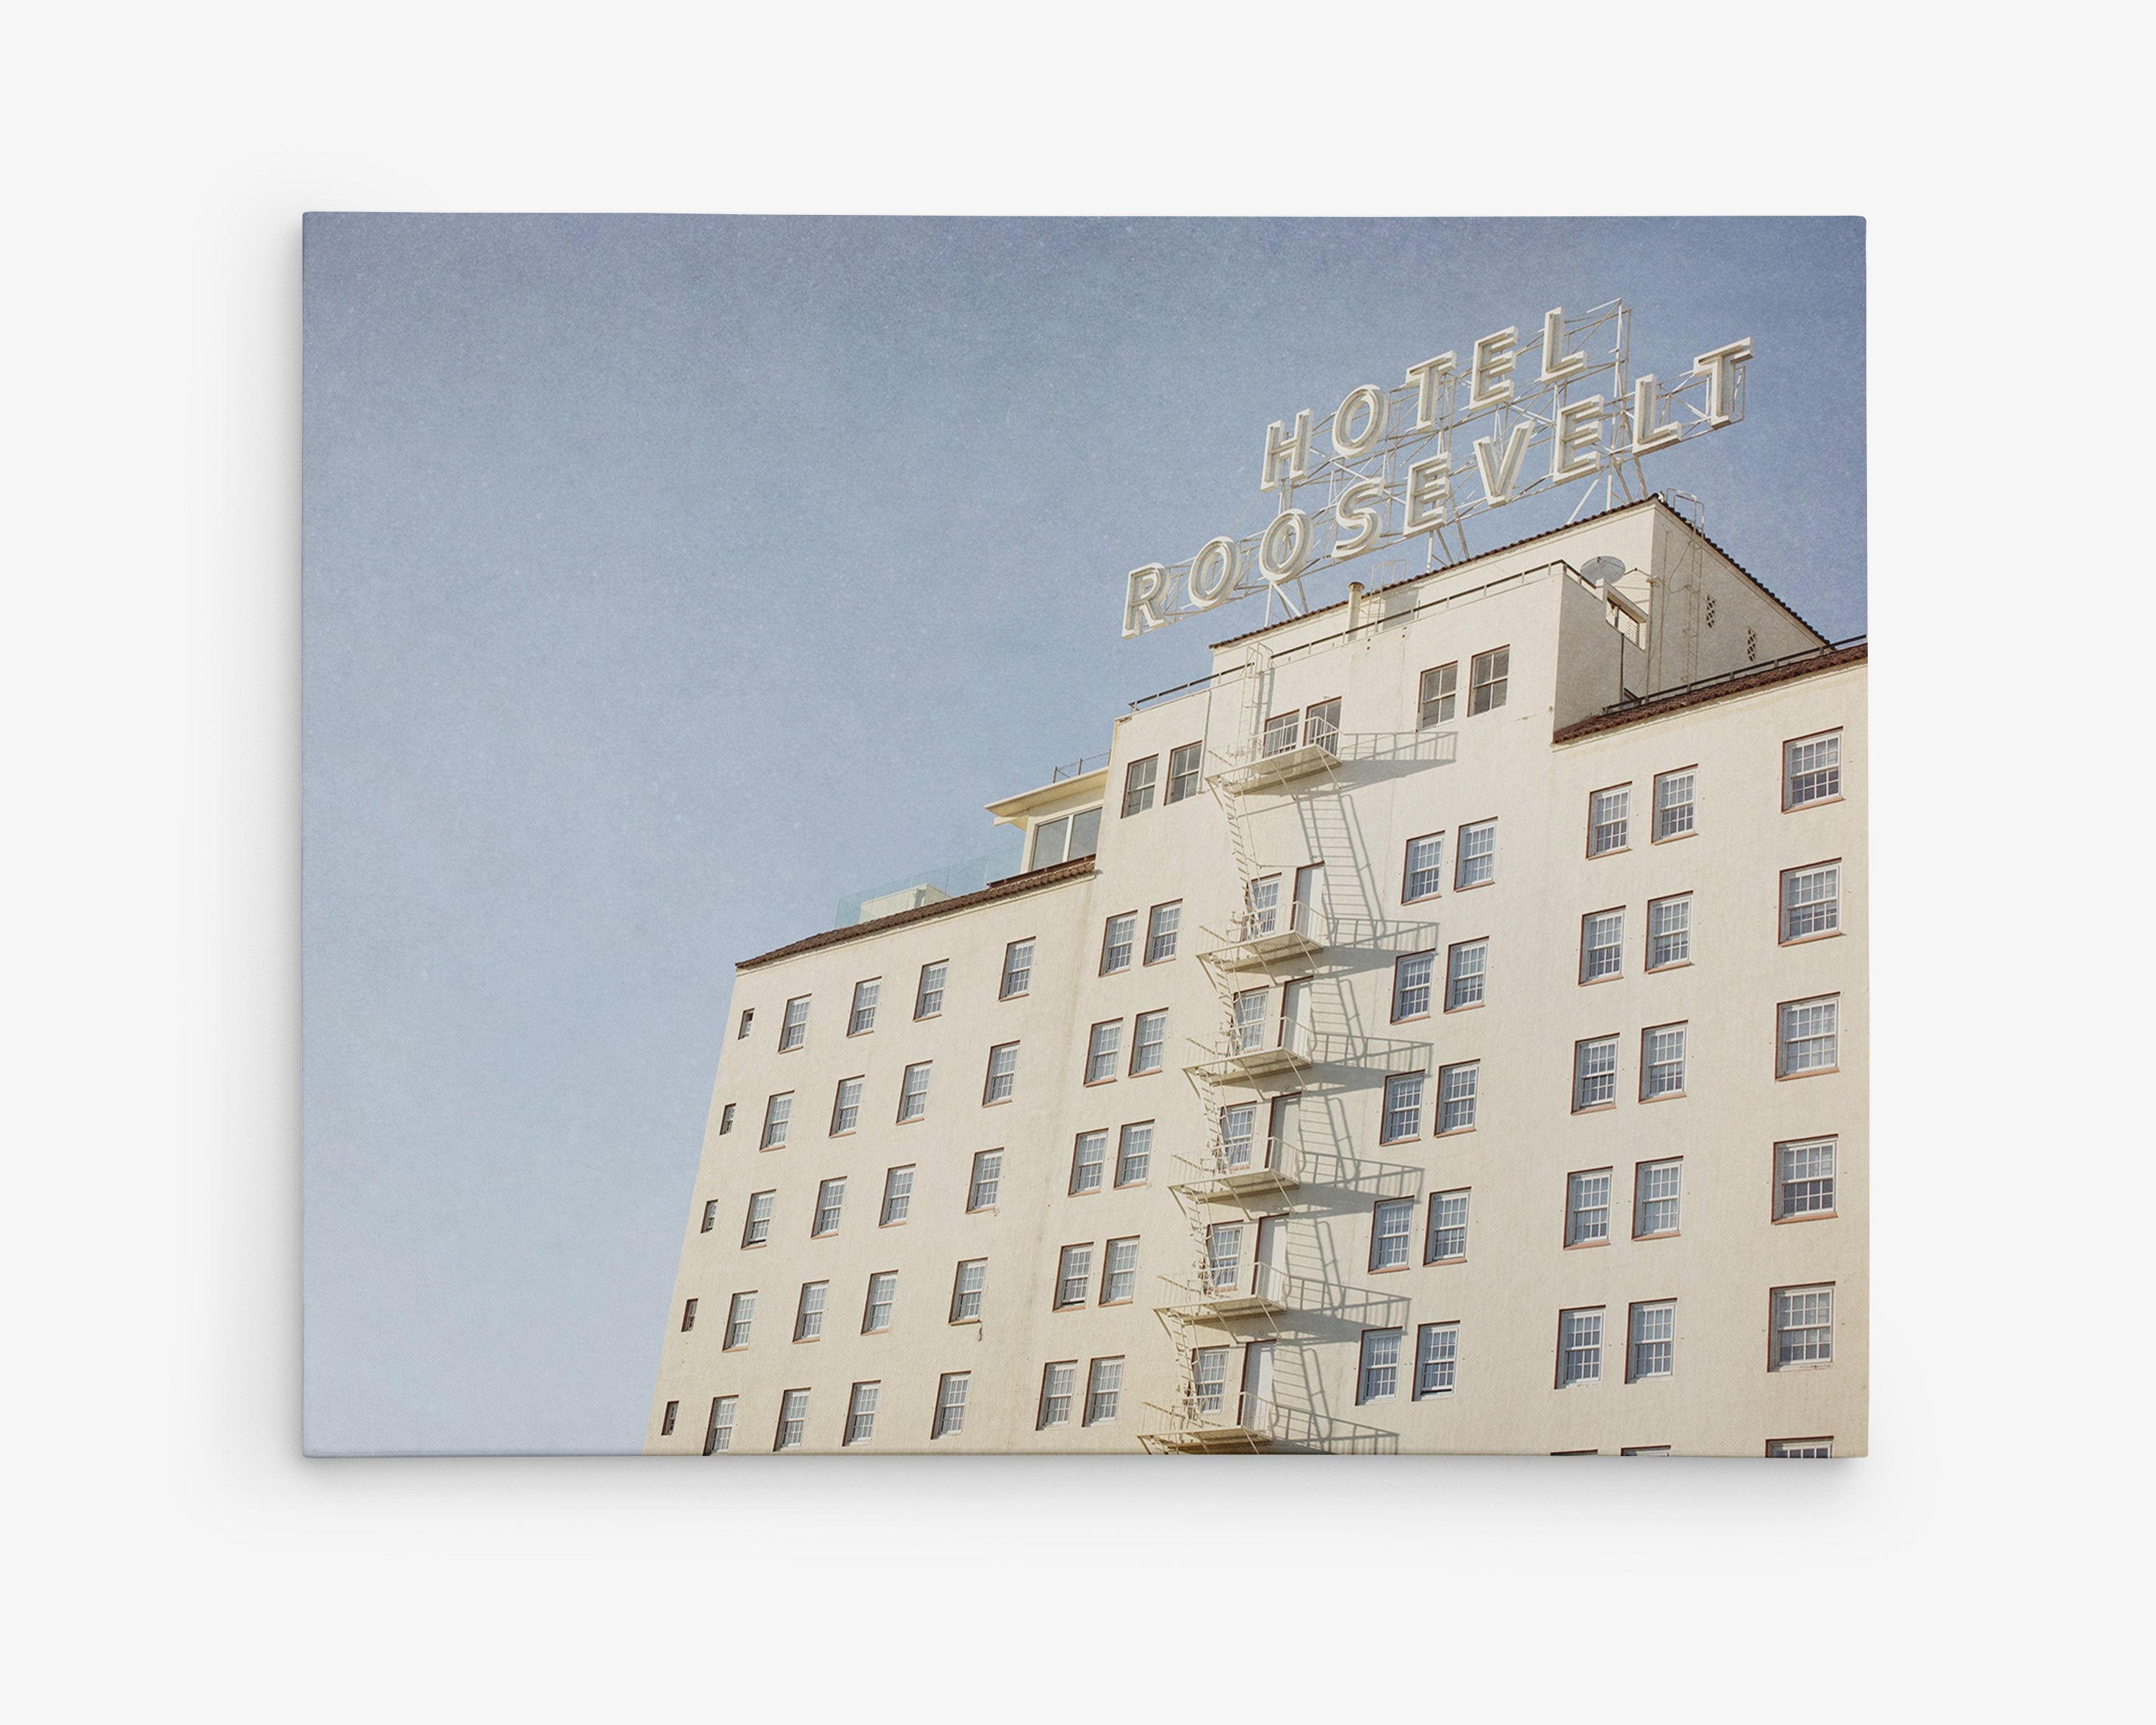 Los Angeles Wall Art showing the Roosevelt Hotel in Hollywood.